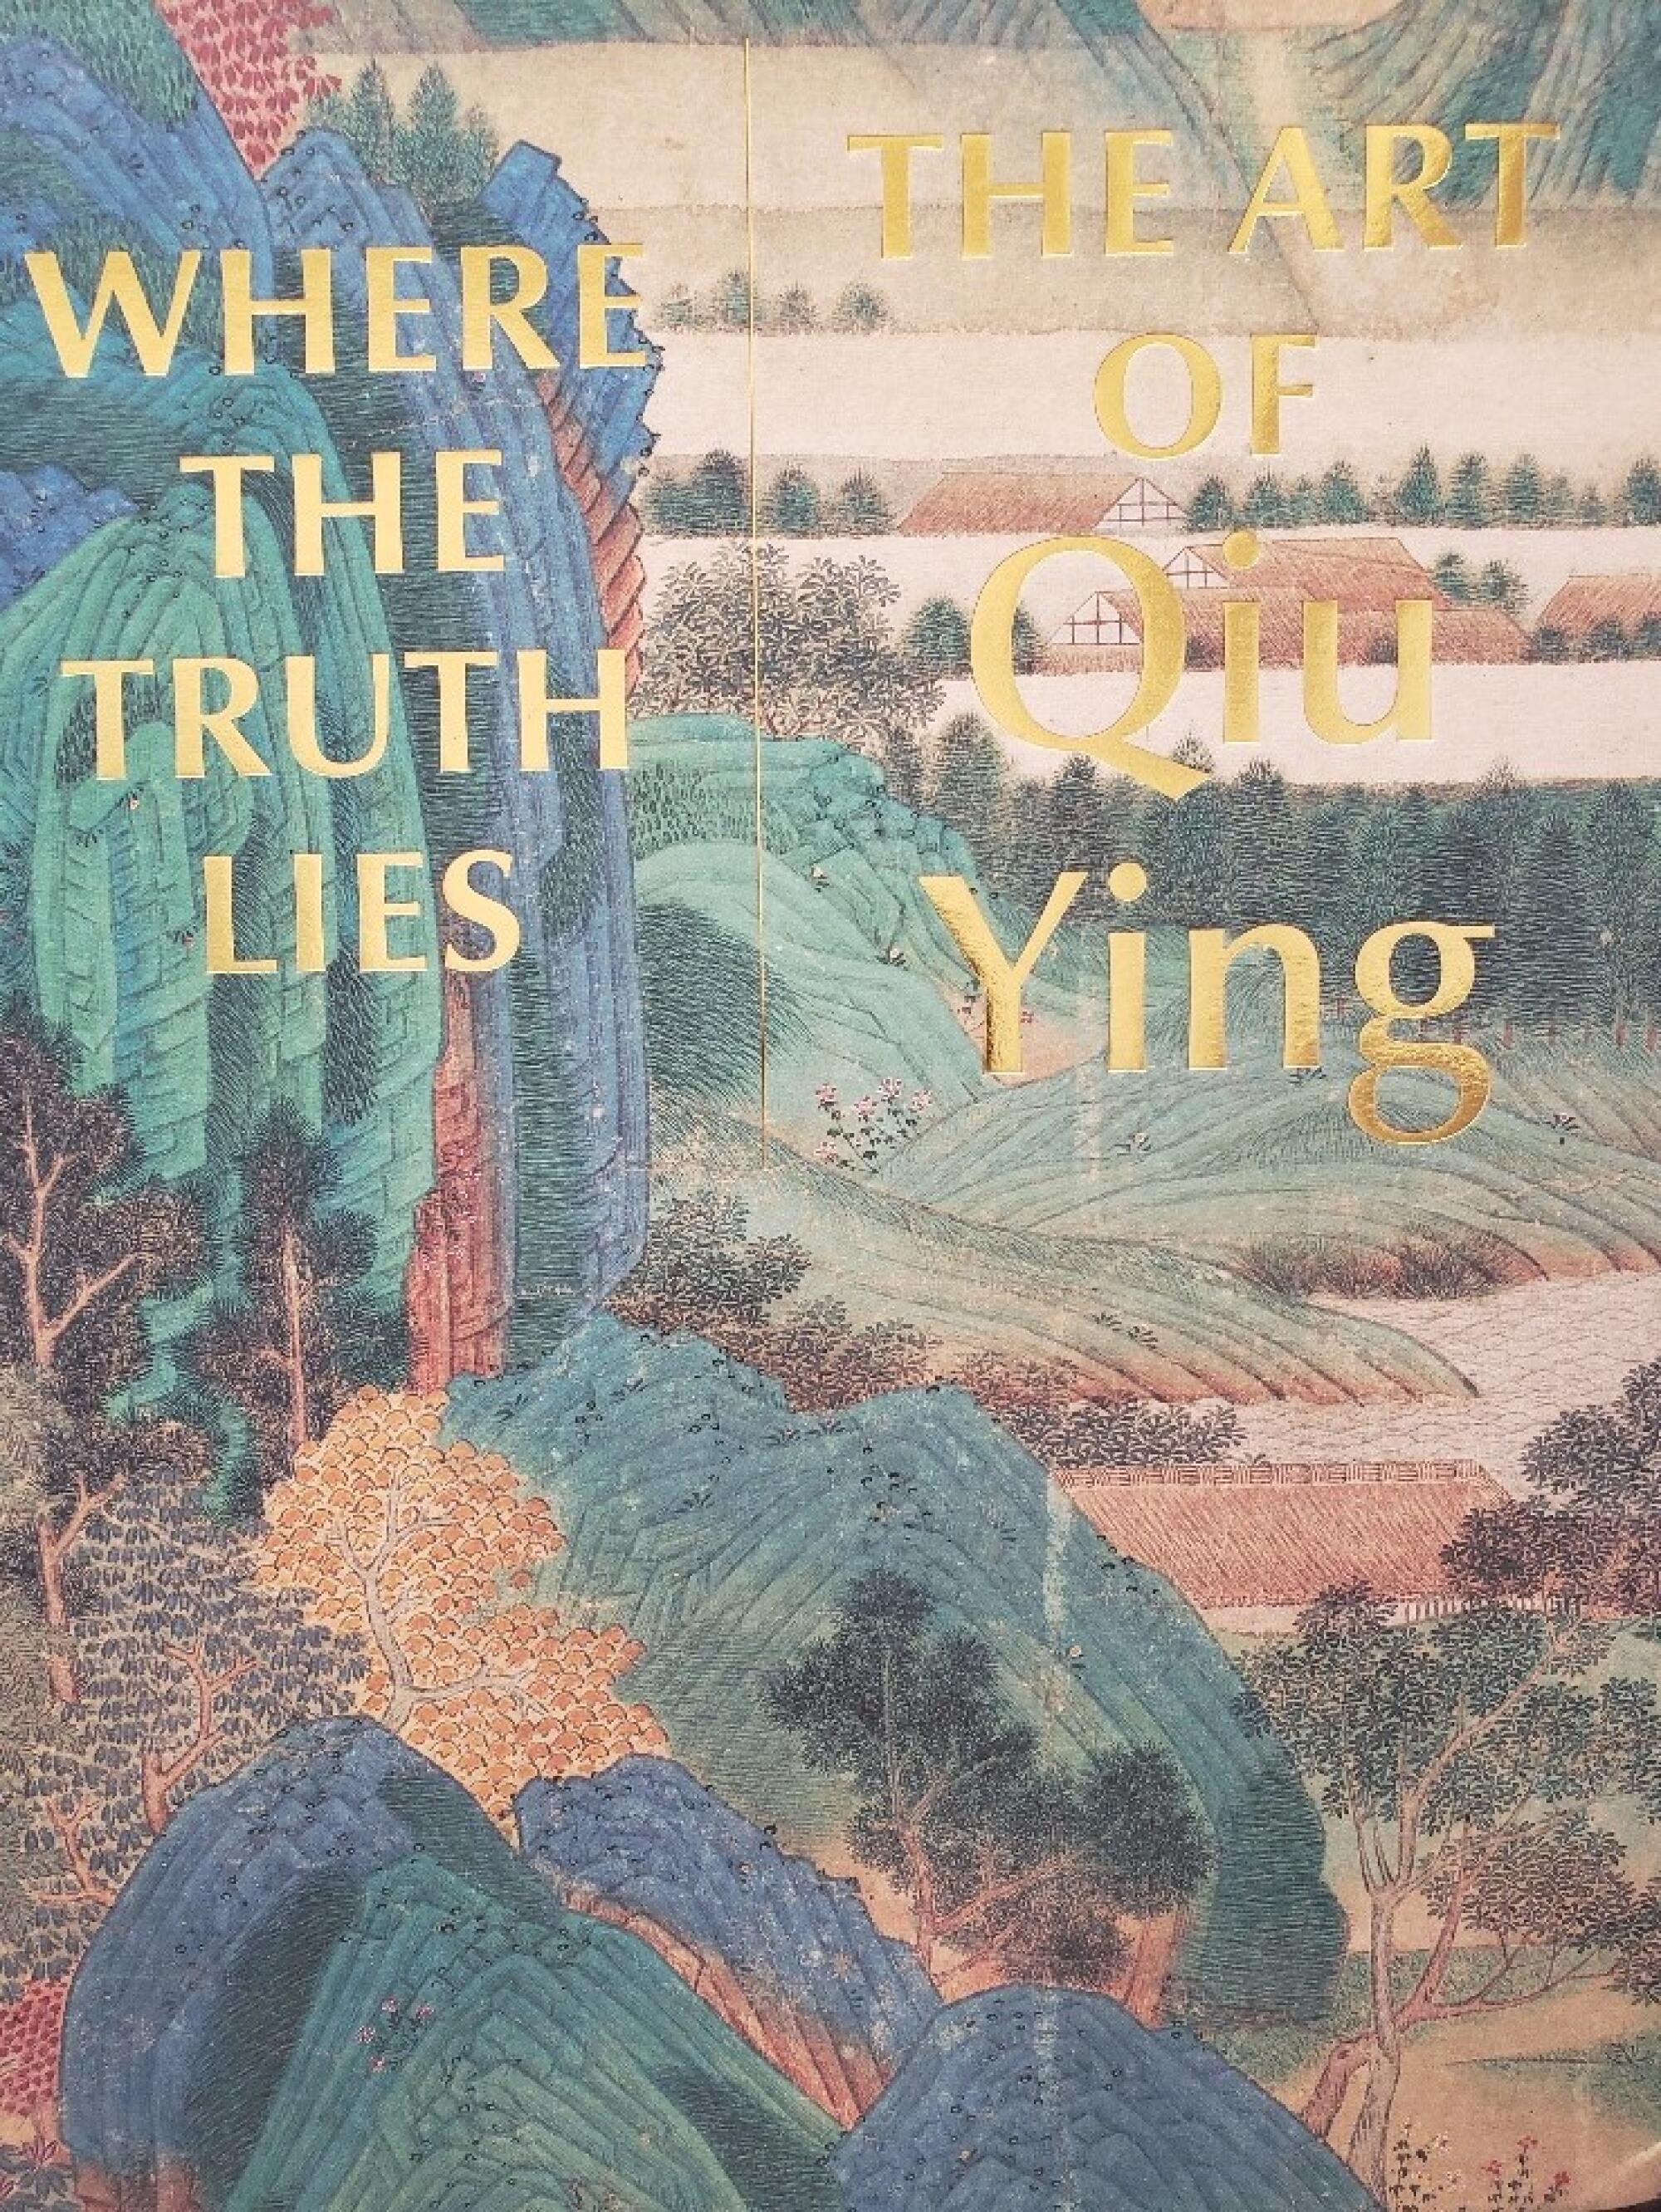 Stephen Little, "Where the Truth Lies: The Art of Qiu Ying"